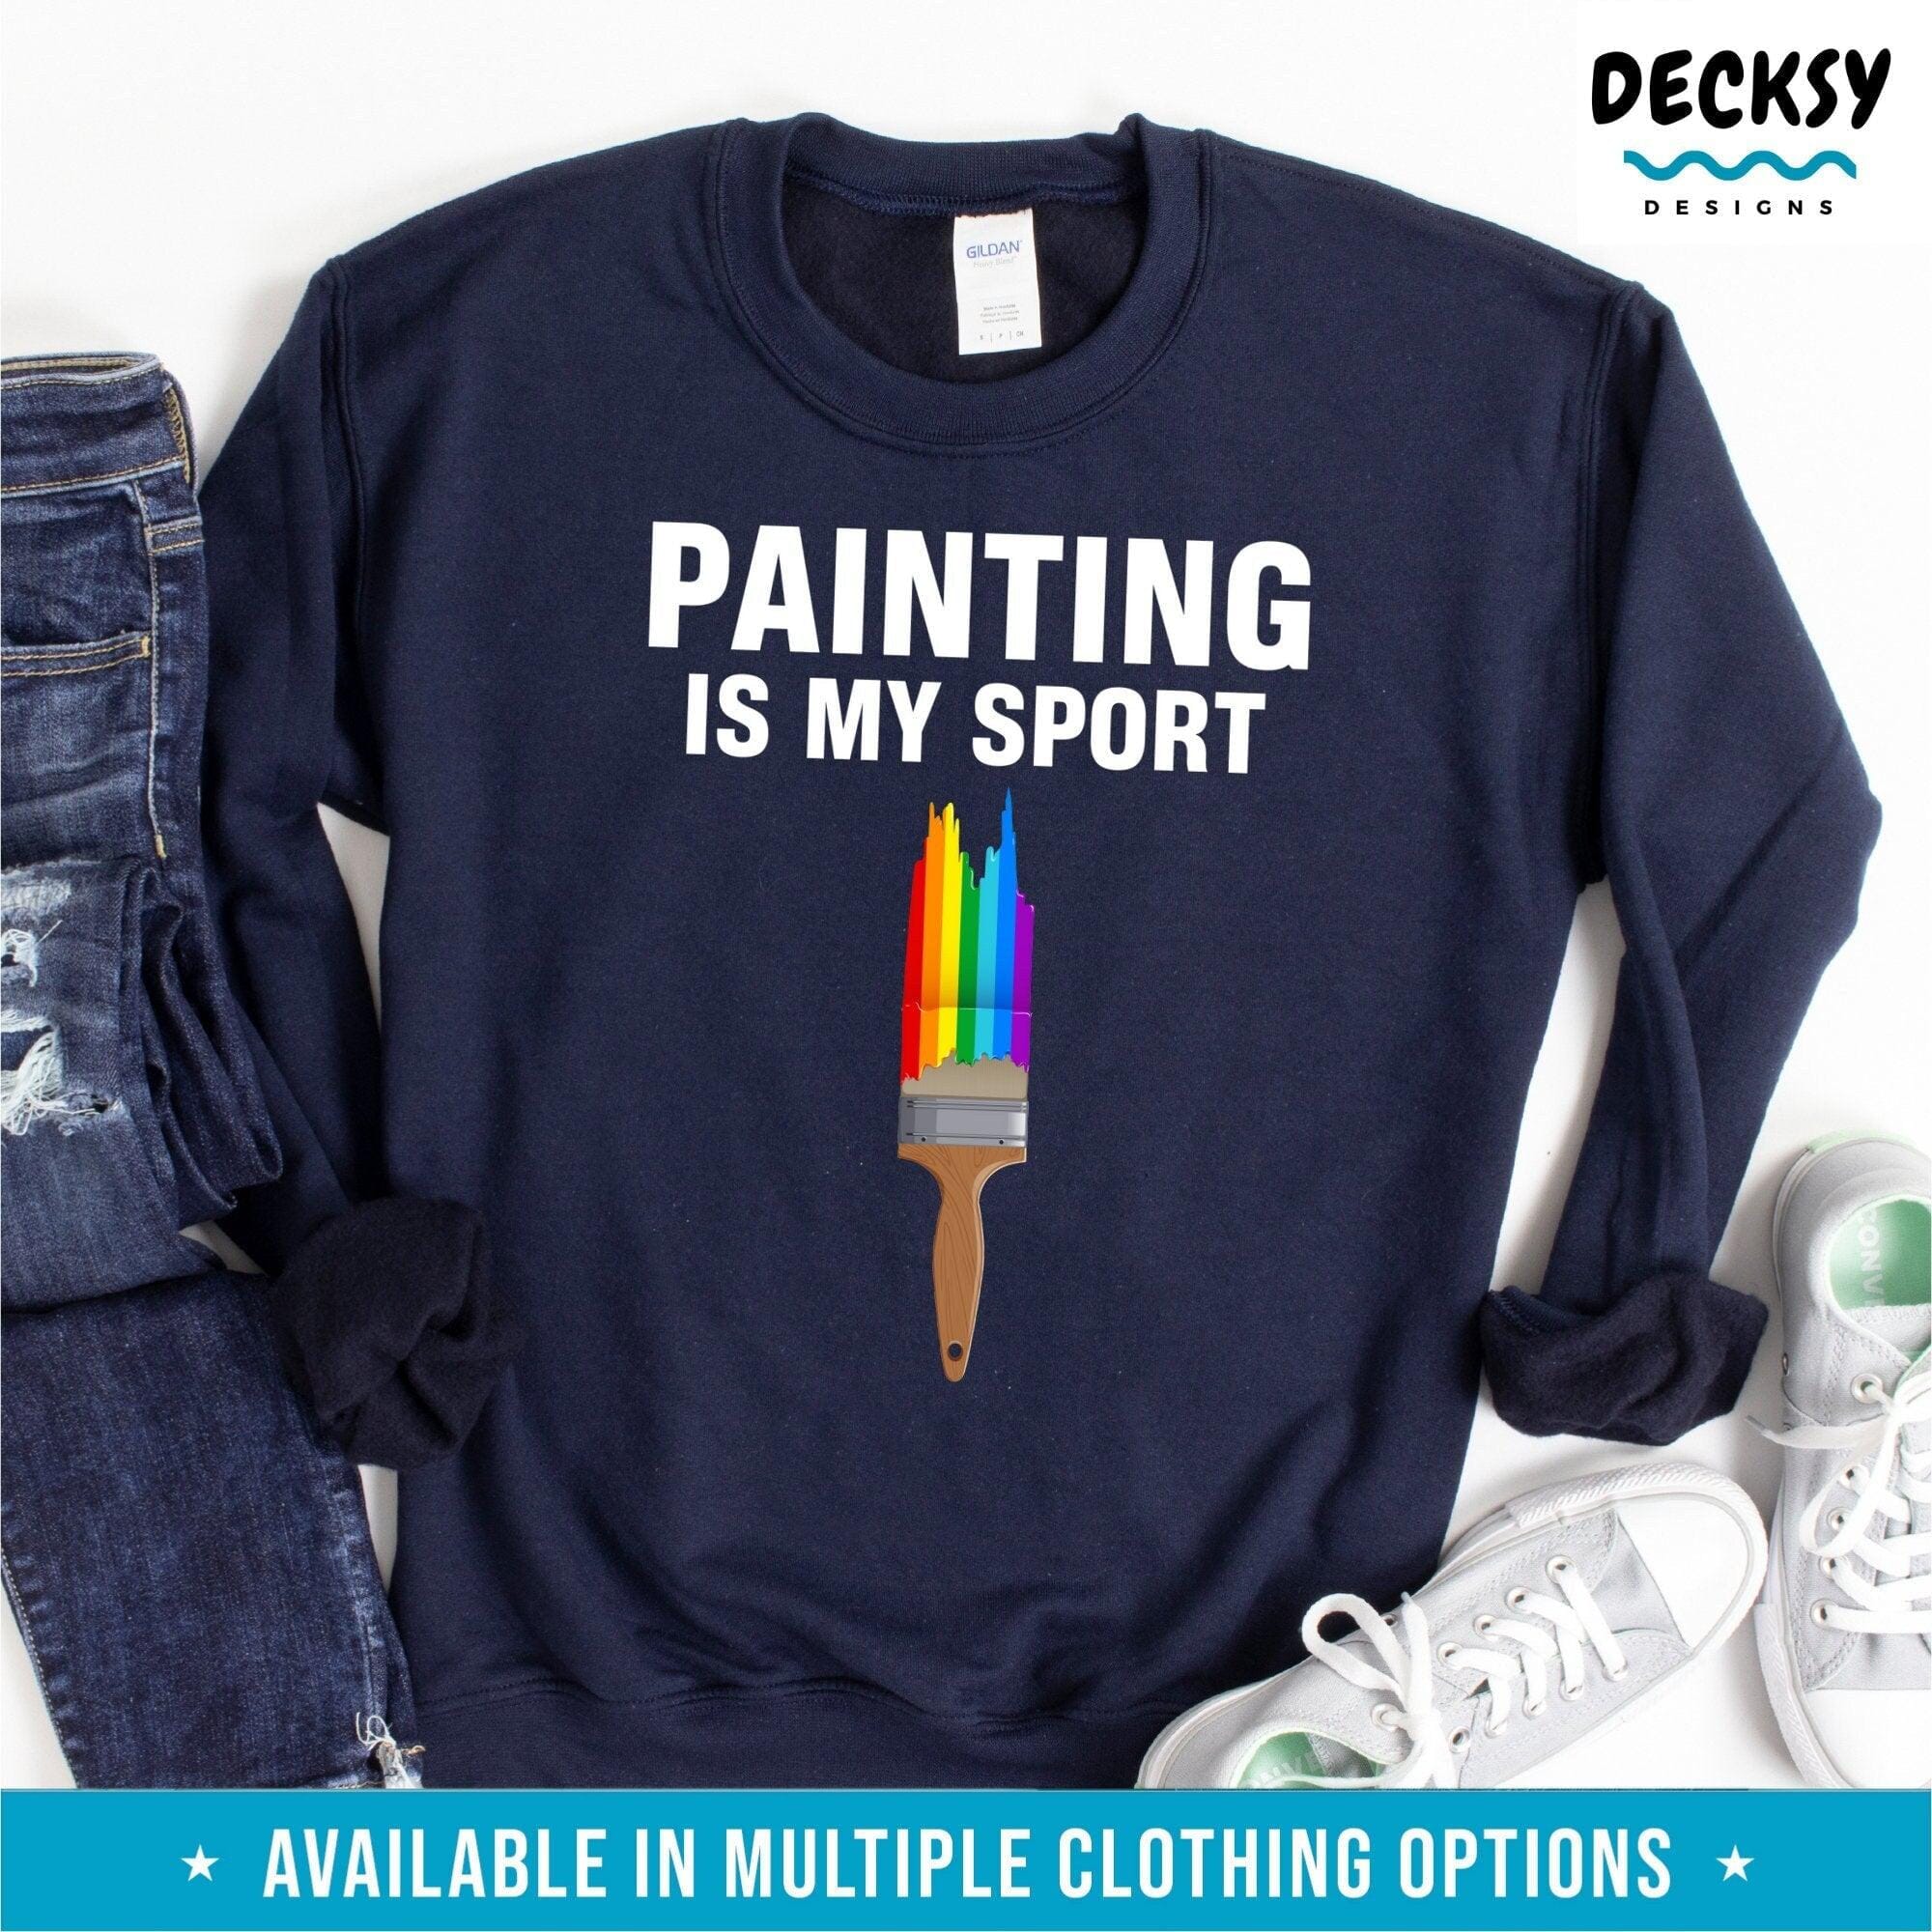 Artist Shirt, Funny Painter Gift-Clothing:Gender-Neutral Adult Clothing:Tops & Tees:T-shirts:Graphic Tees-DecksyDesigns